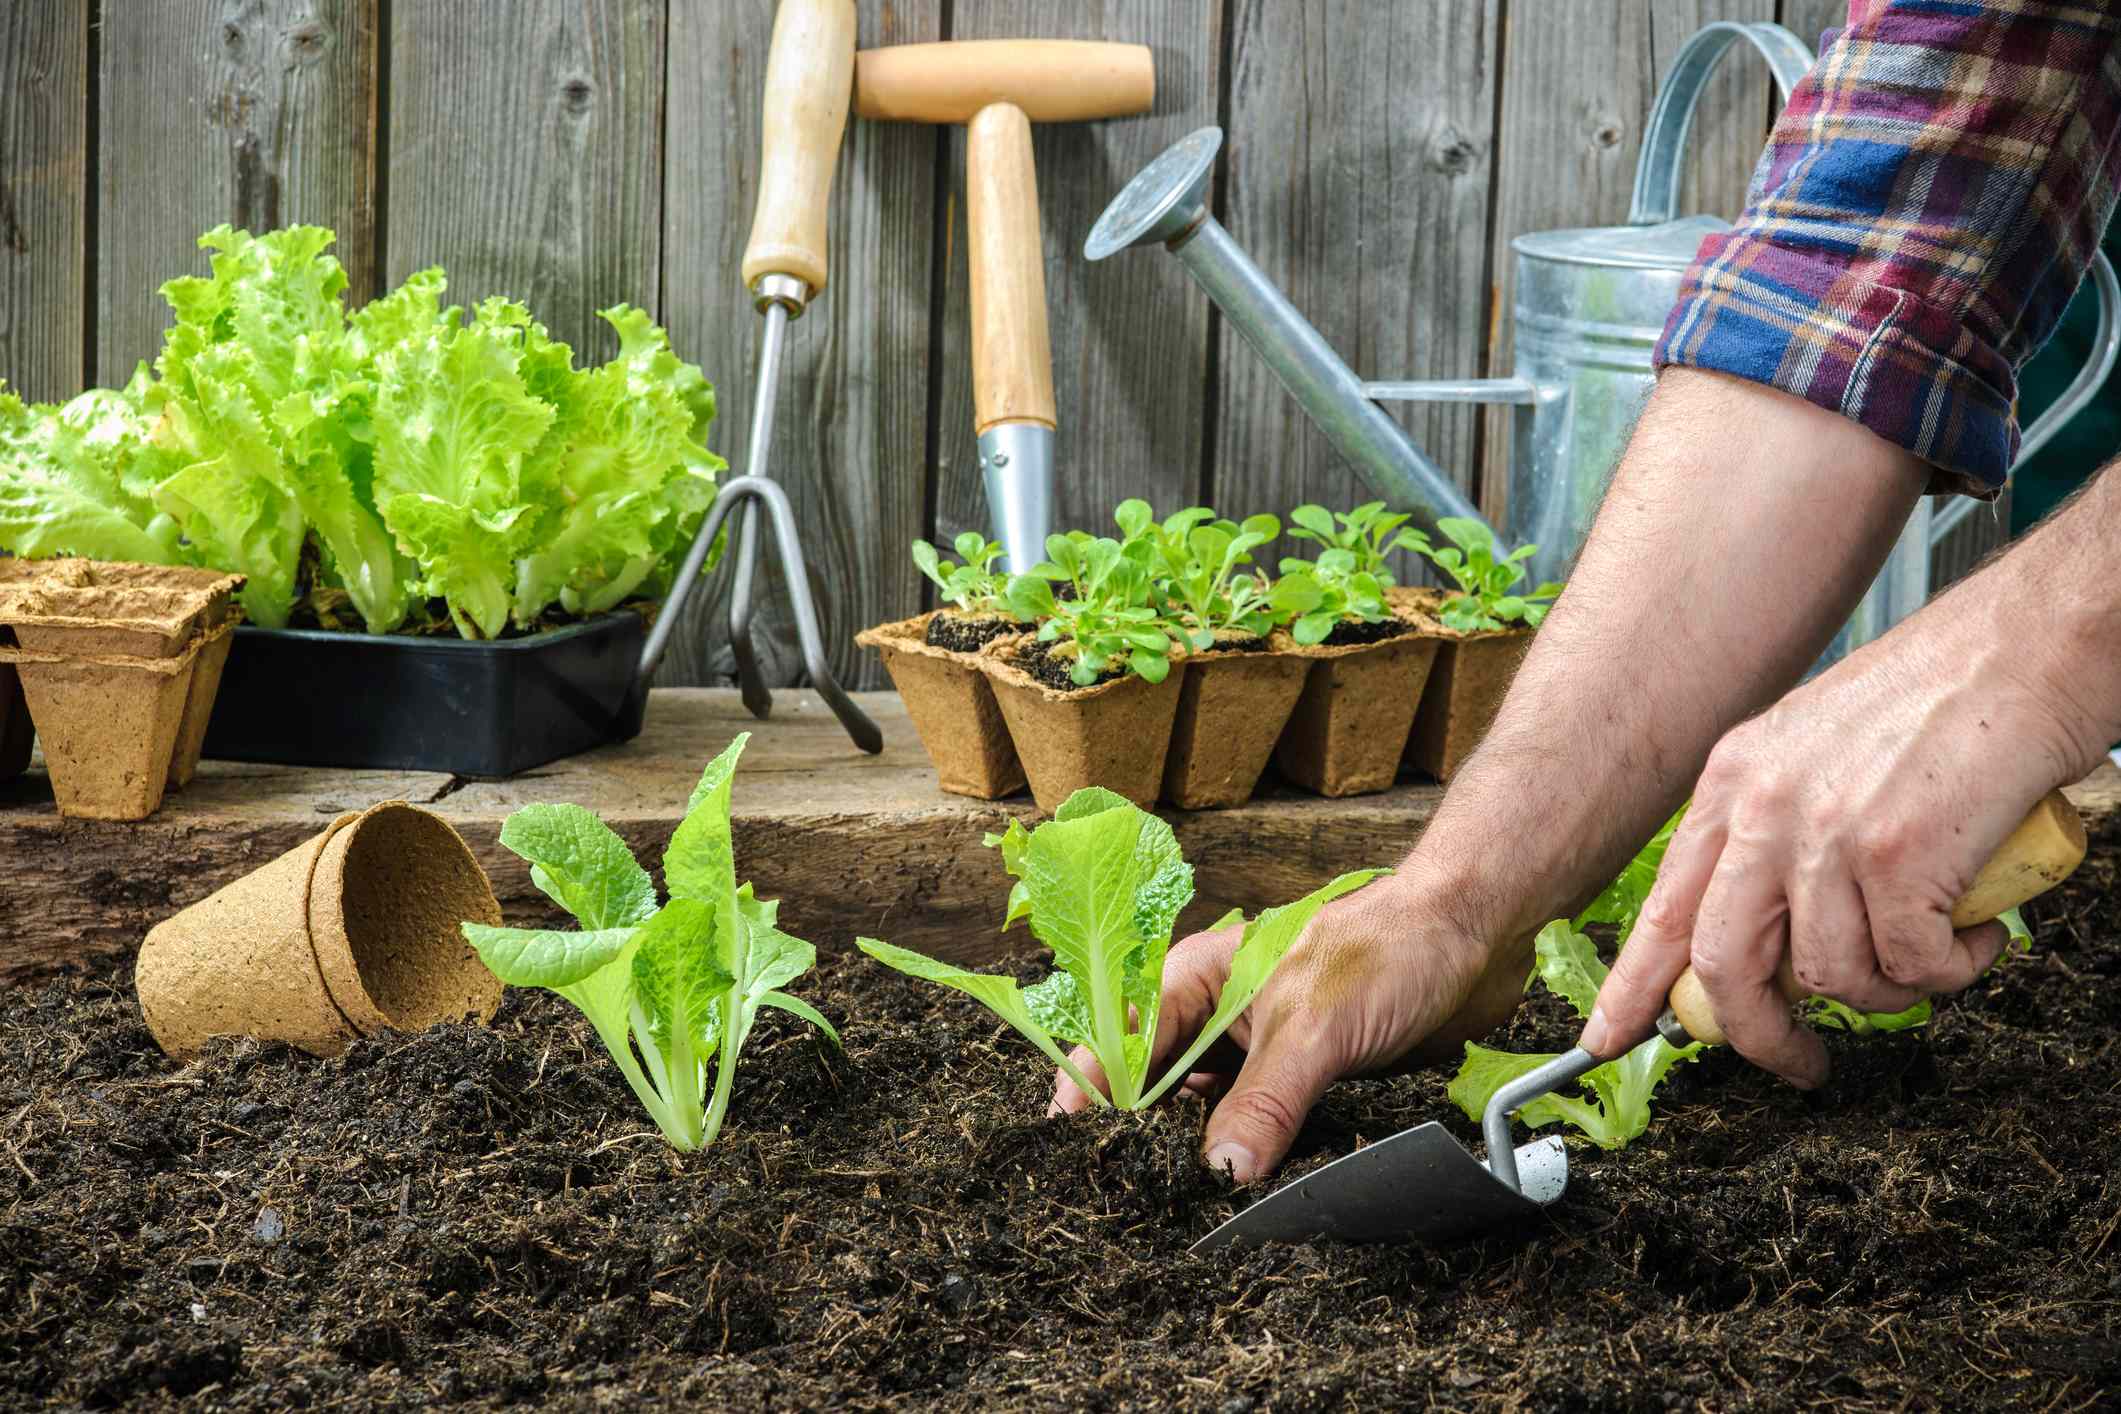 How To Sow Lettuce Seeds